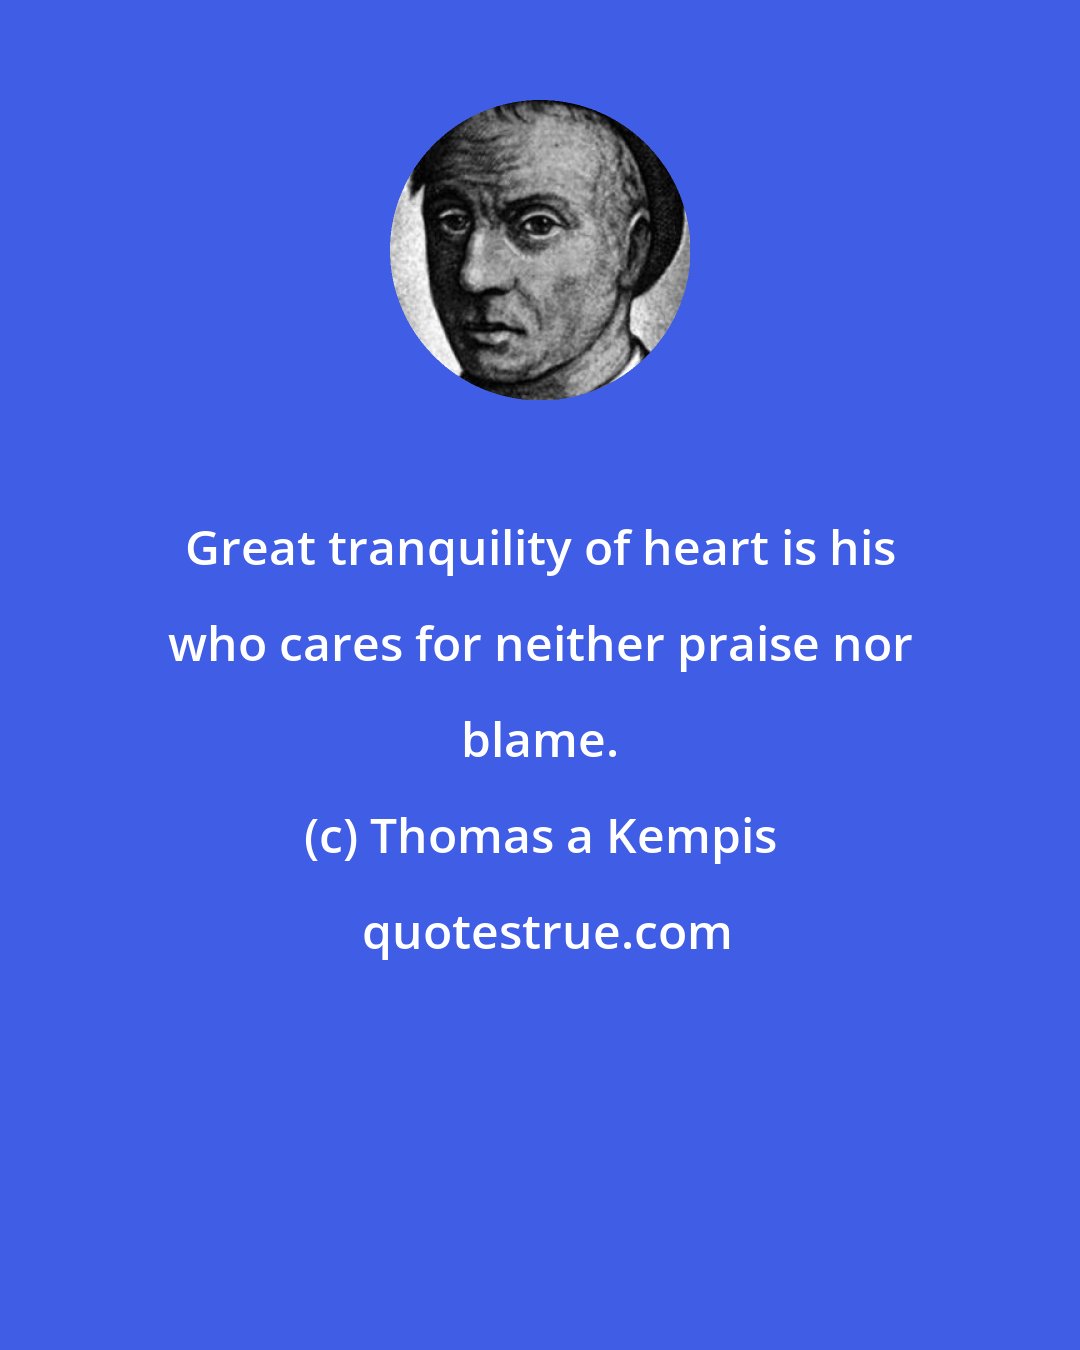 Thomas a Kempis: Great tranquility of heart is his who cares for neither praise nor blame.